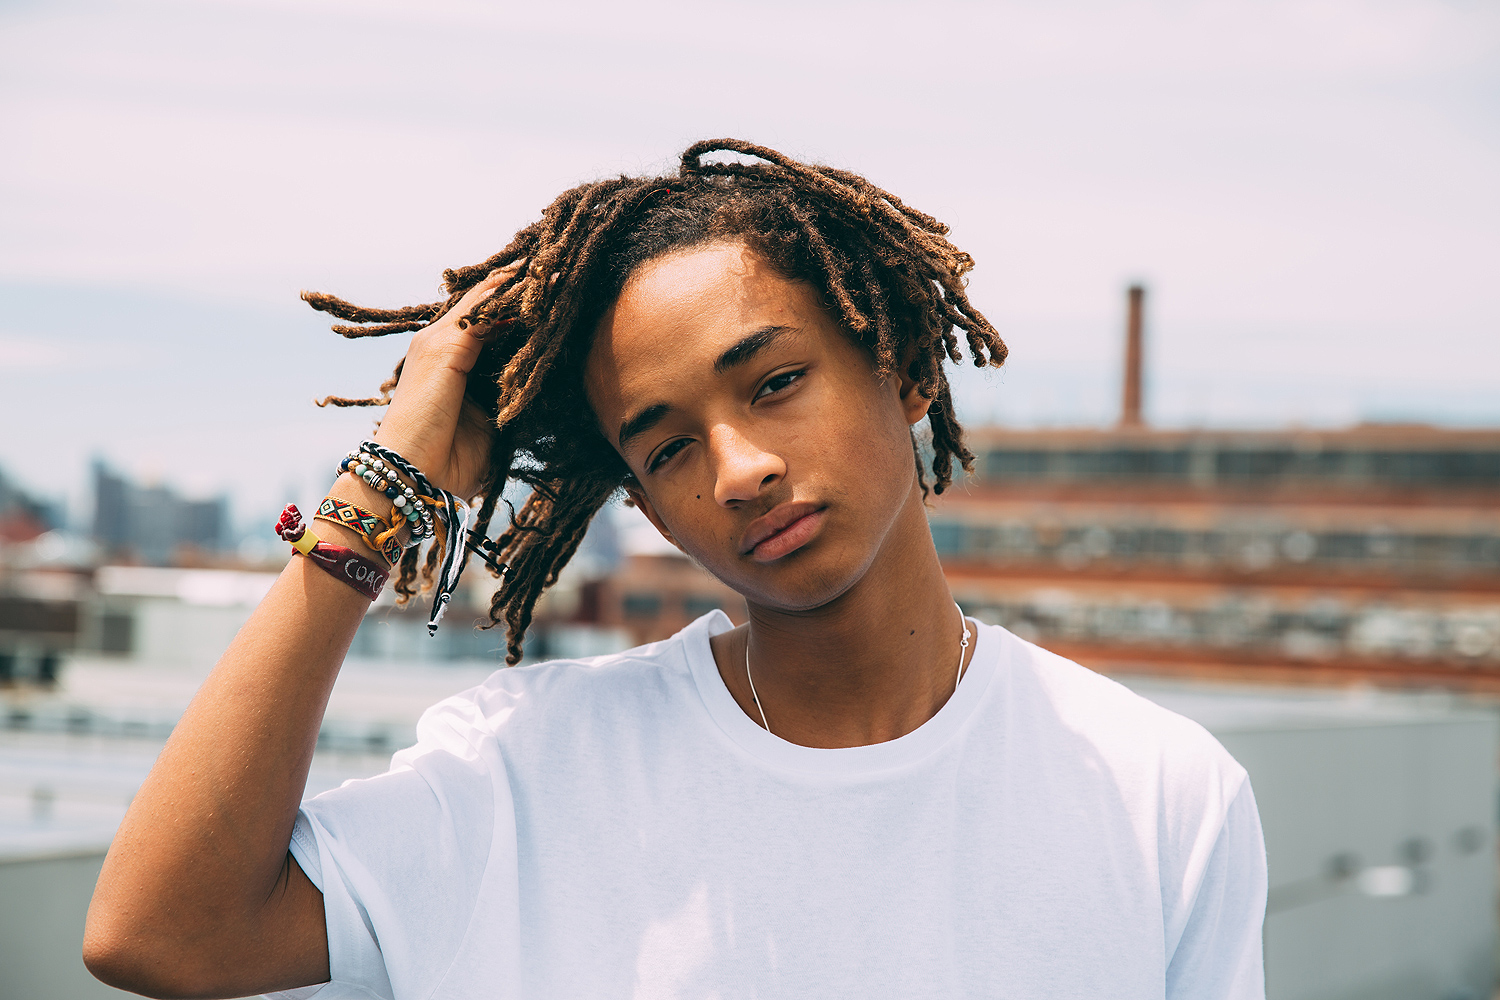 Jaden Smith Model For Louis Vuitton 'SS16' Campaign